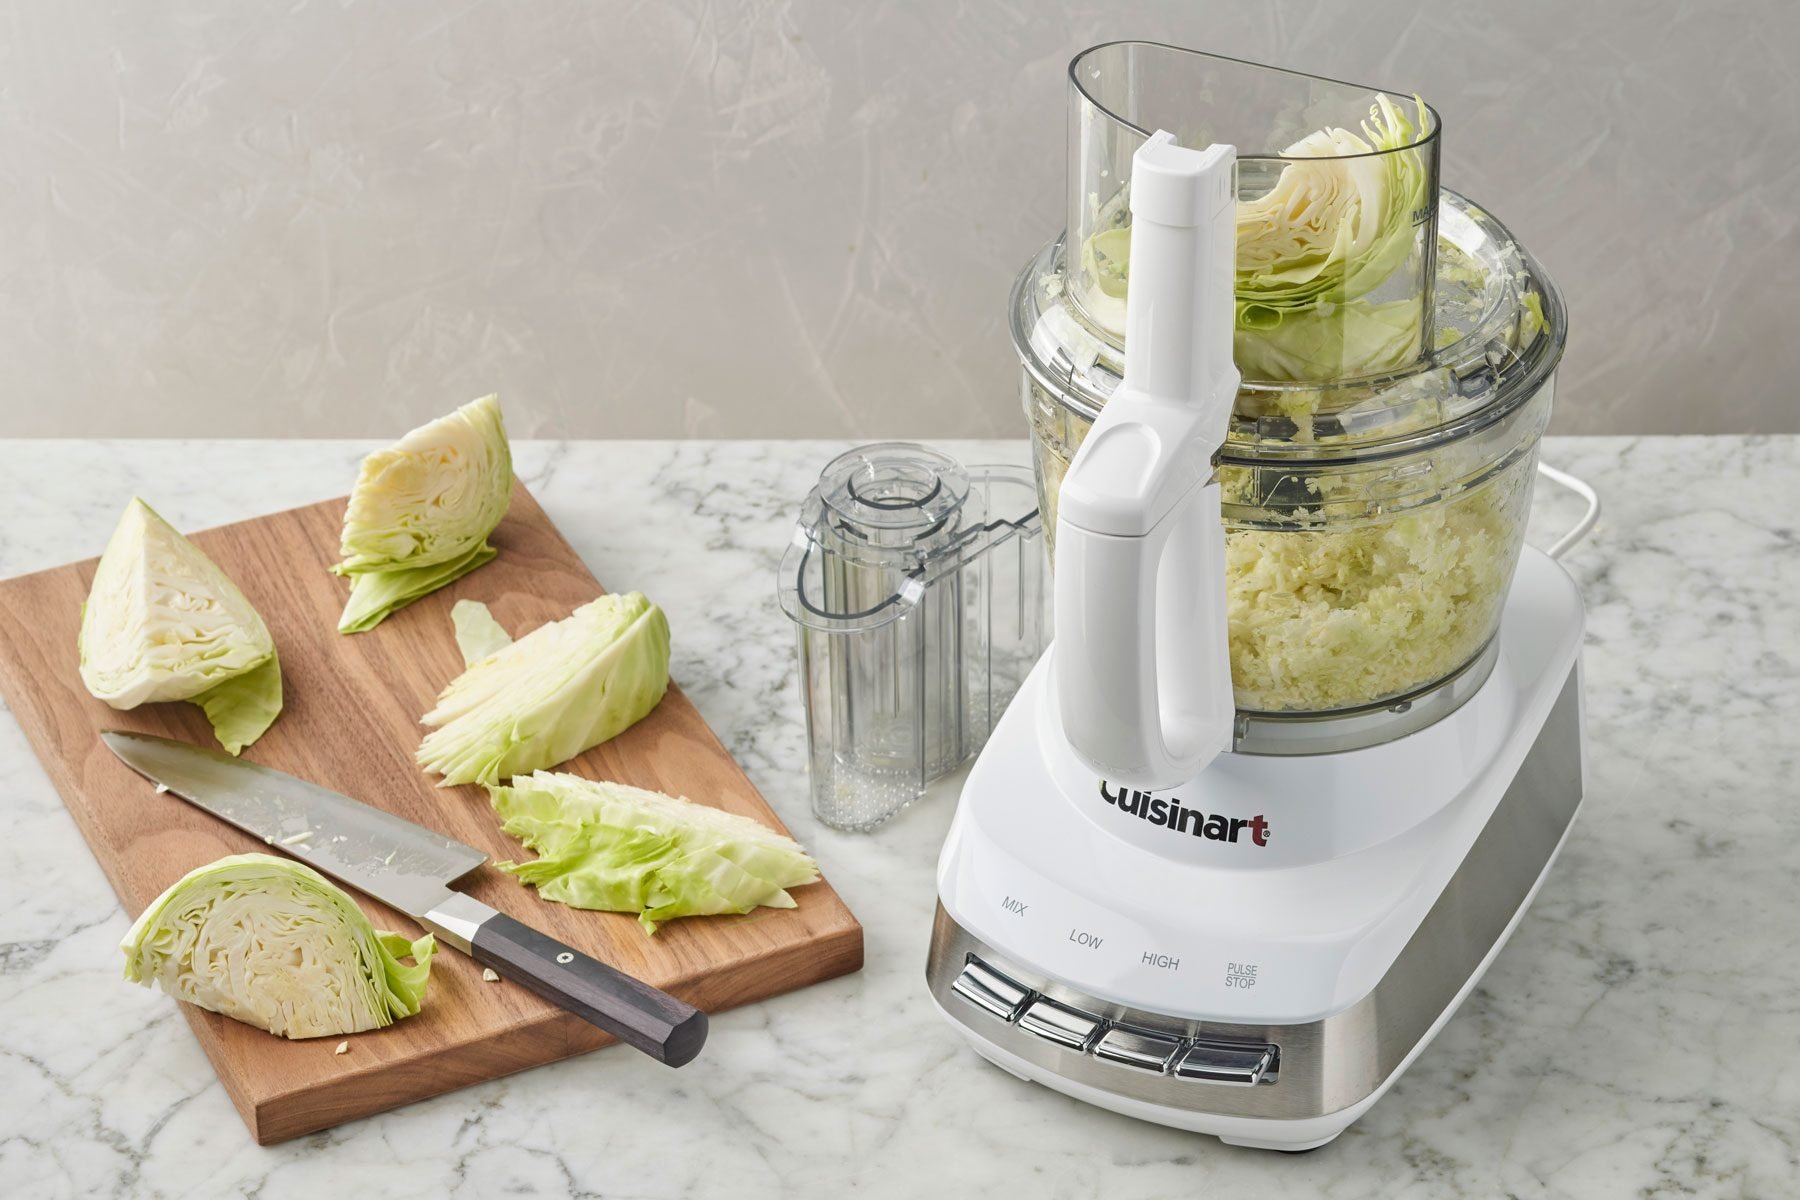 https://www.tasteofhome.com/wp-content/uploads/2019/04/How-to-Shred-Cabbage-TOHPL23_PU6186-_DR_03_02_13-food-processor.jpg?fit=680%2C454